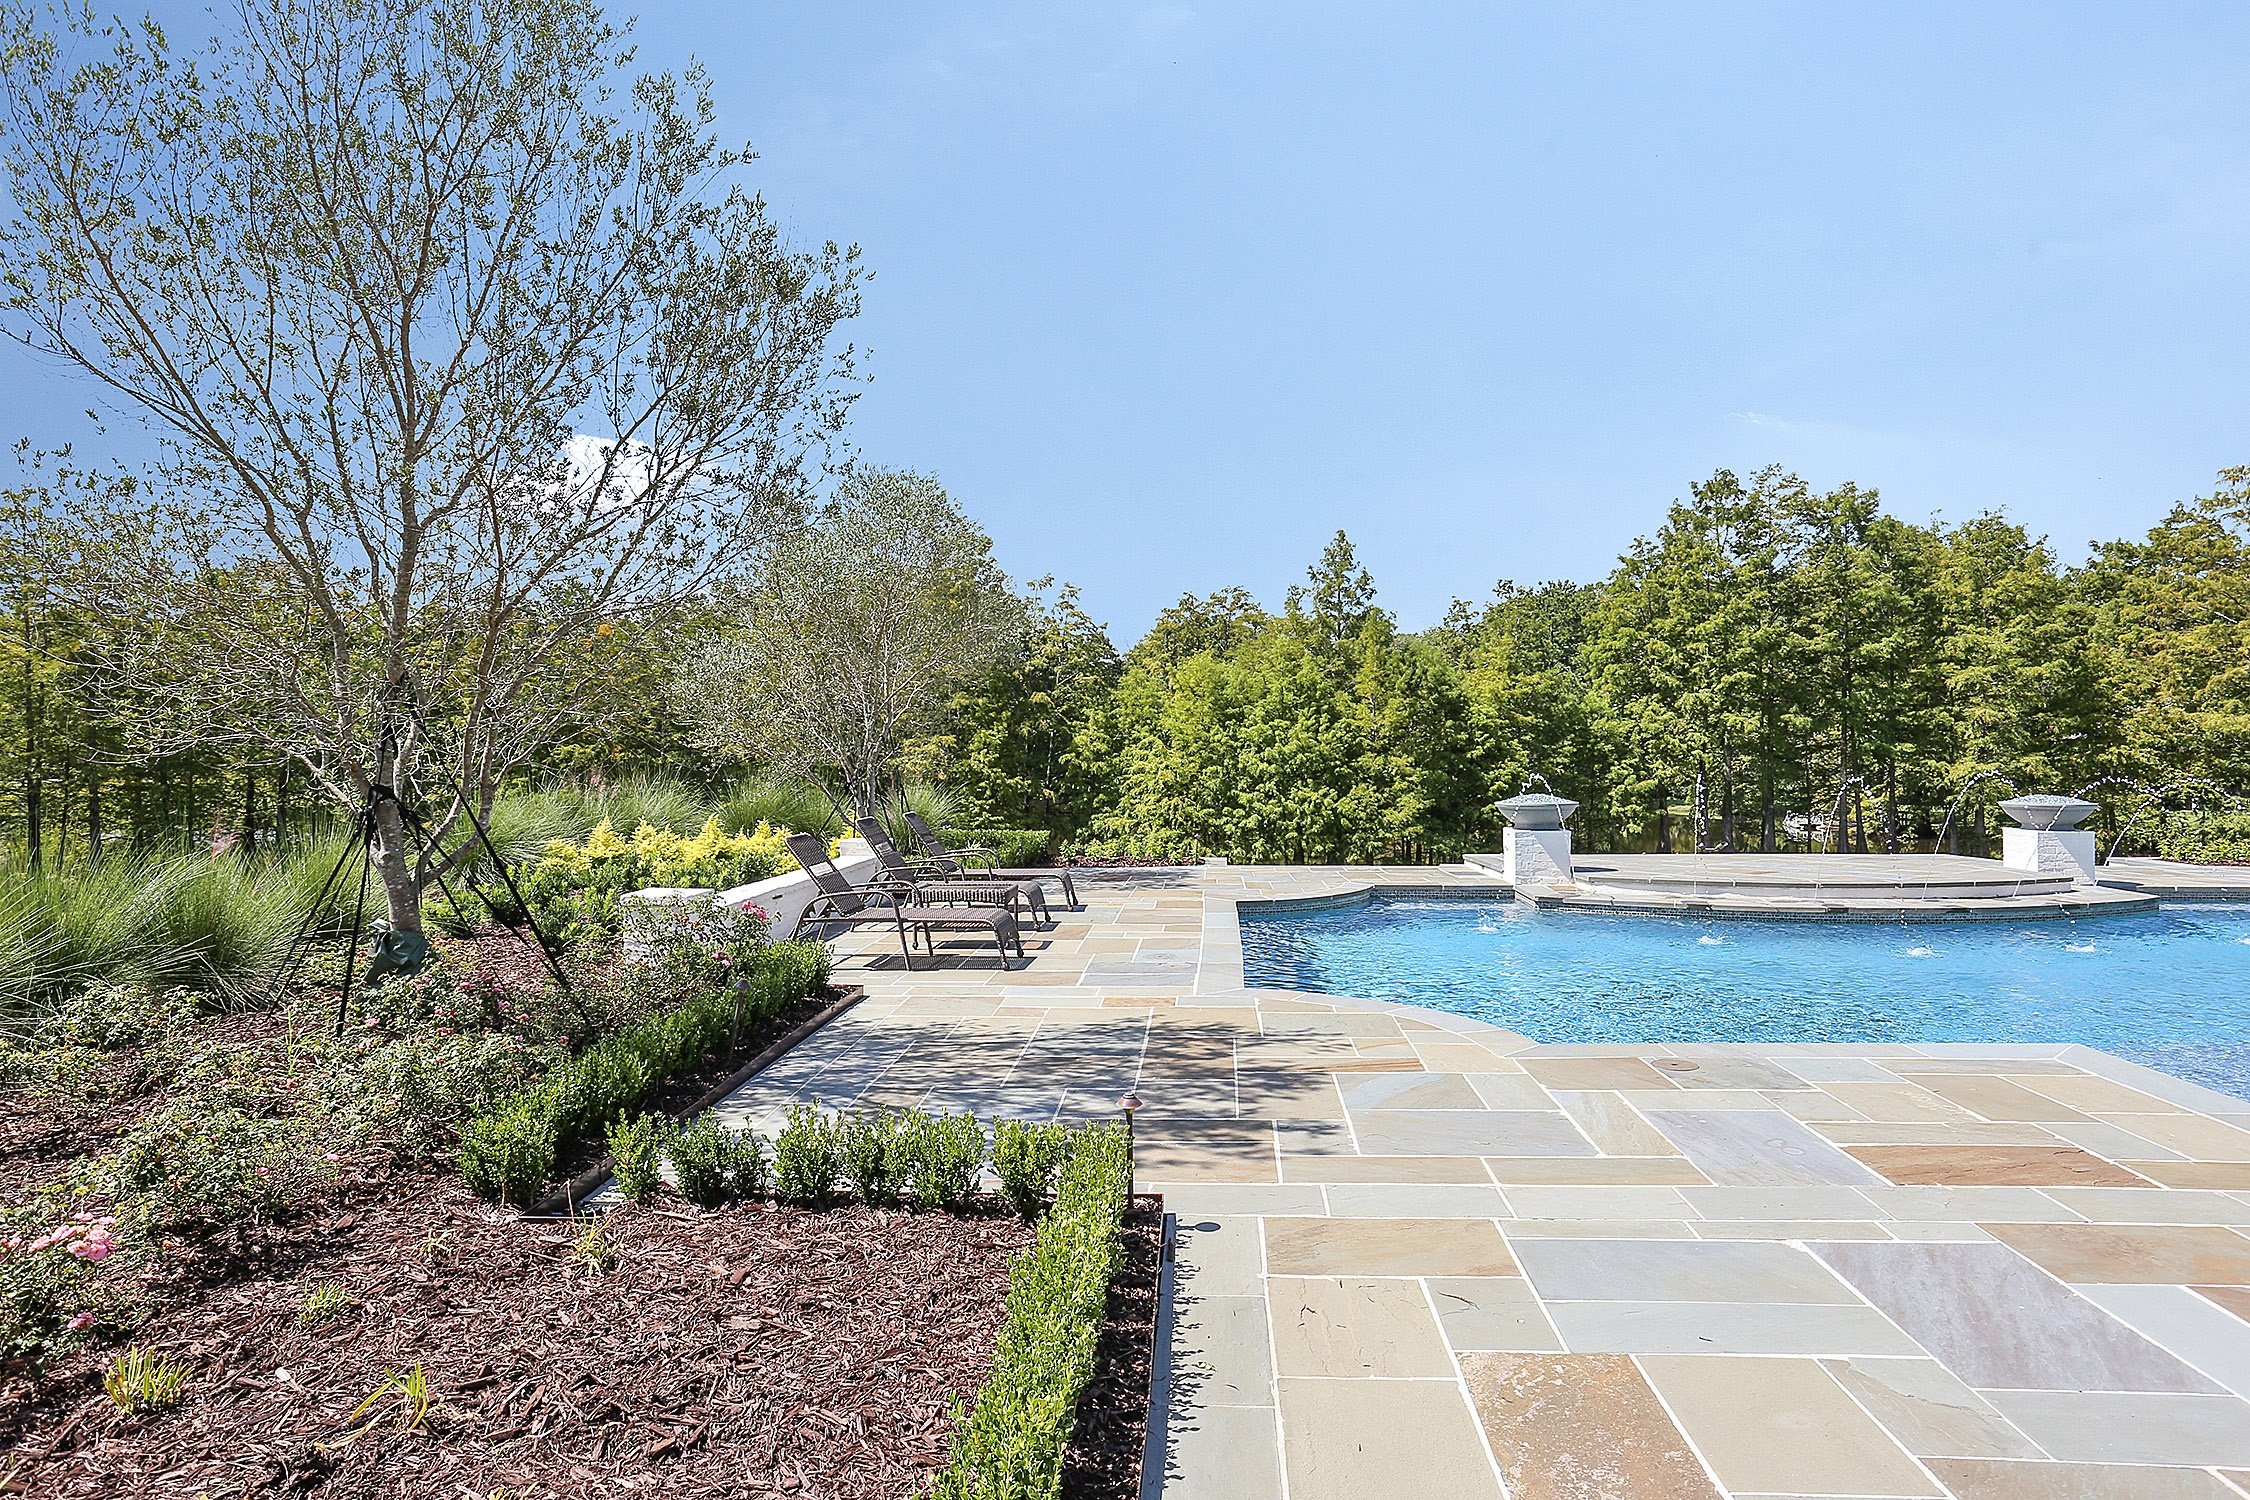 pool decking and landscape